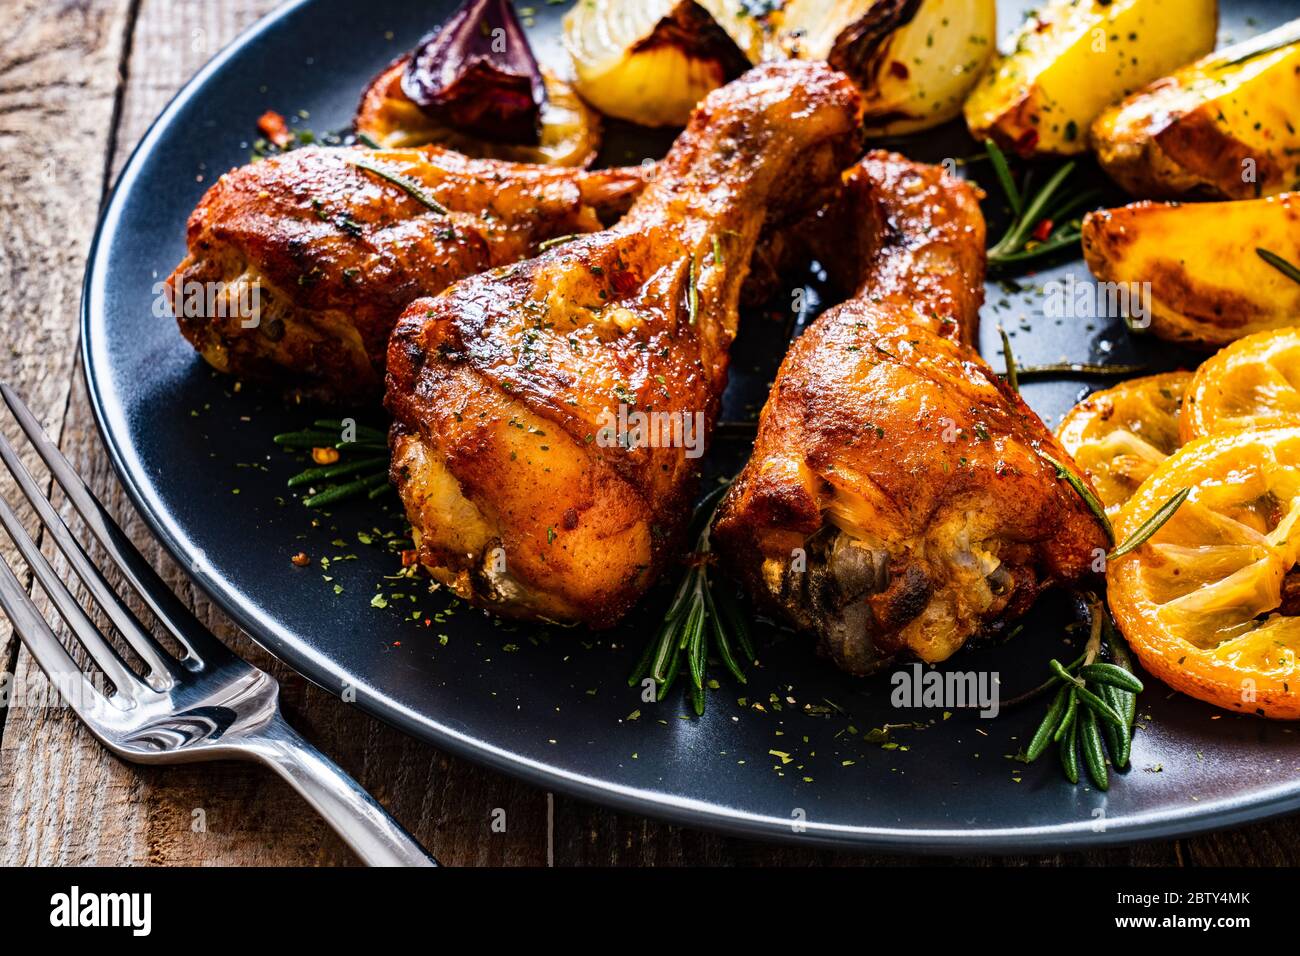 Grilled chicken drumsticks with baked potatoes and onions Stock Photo